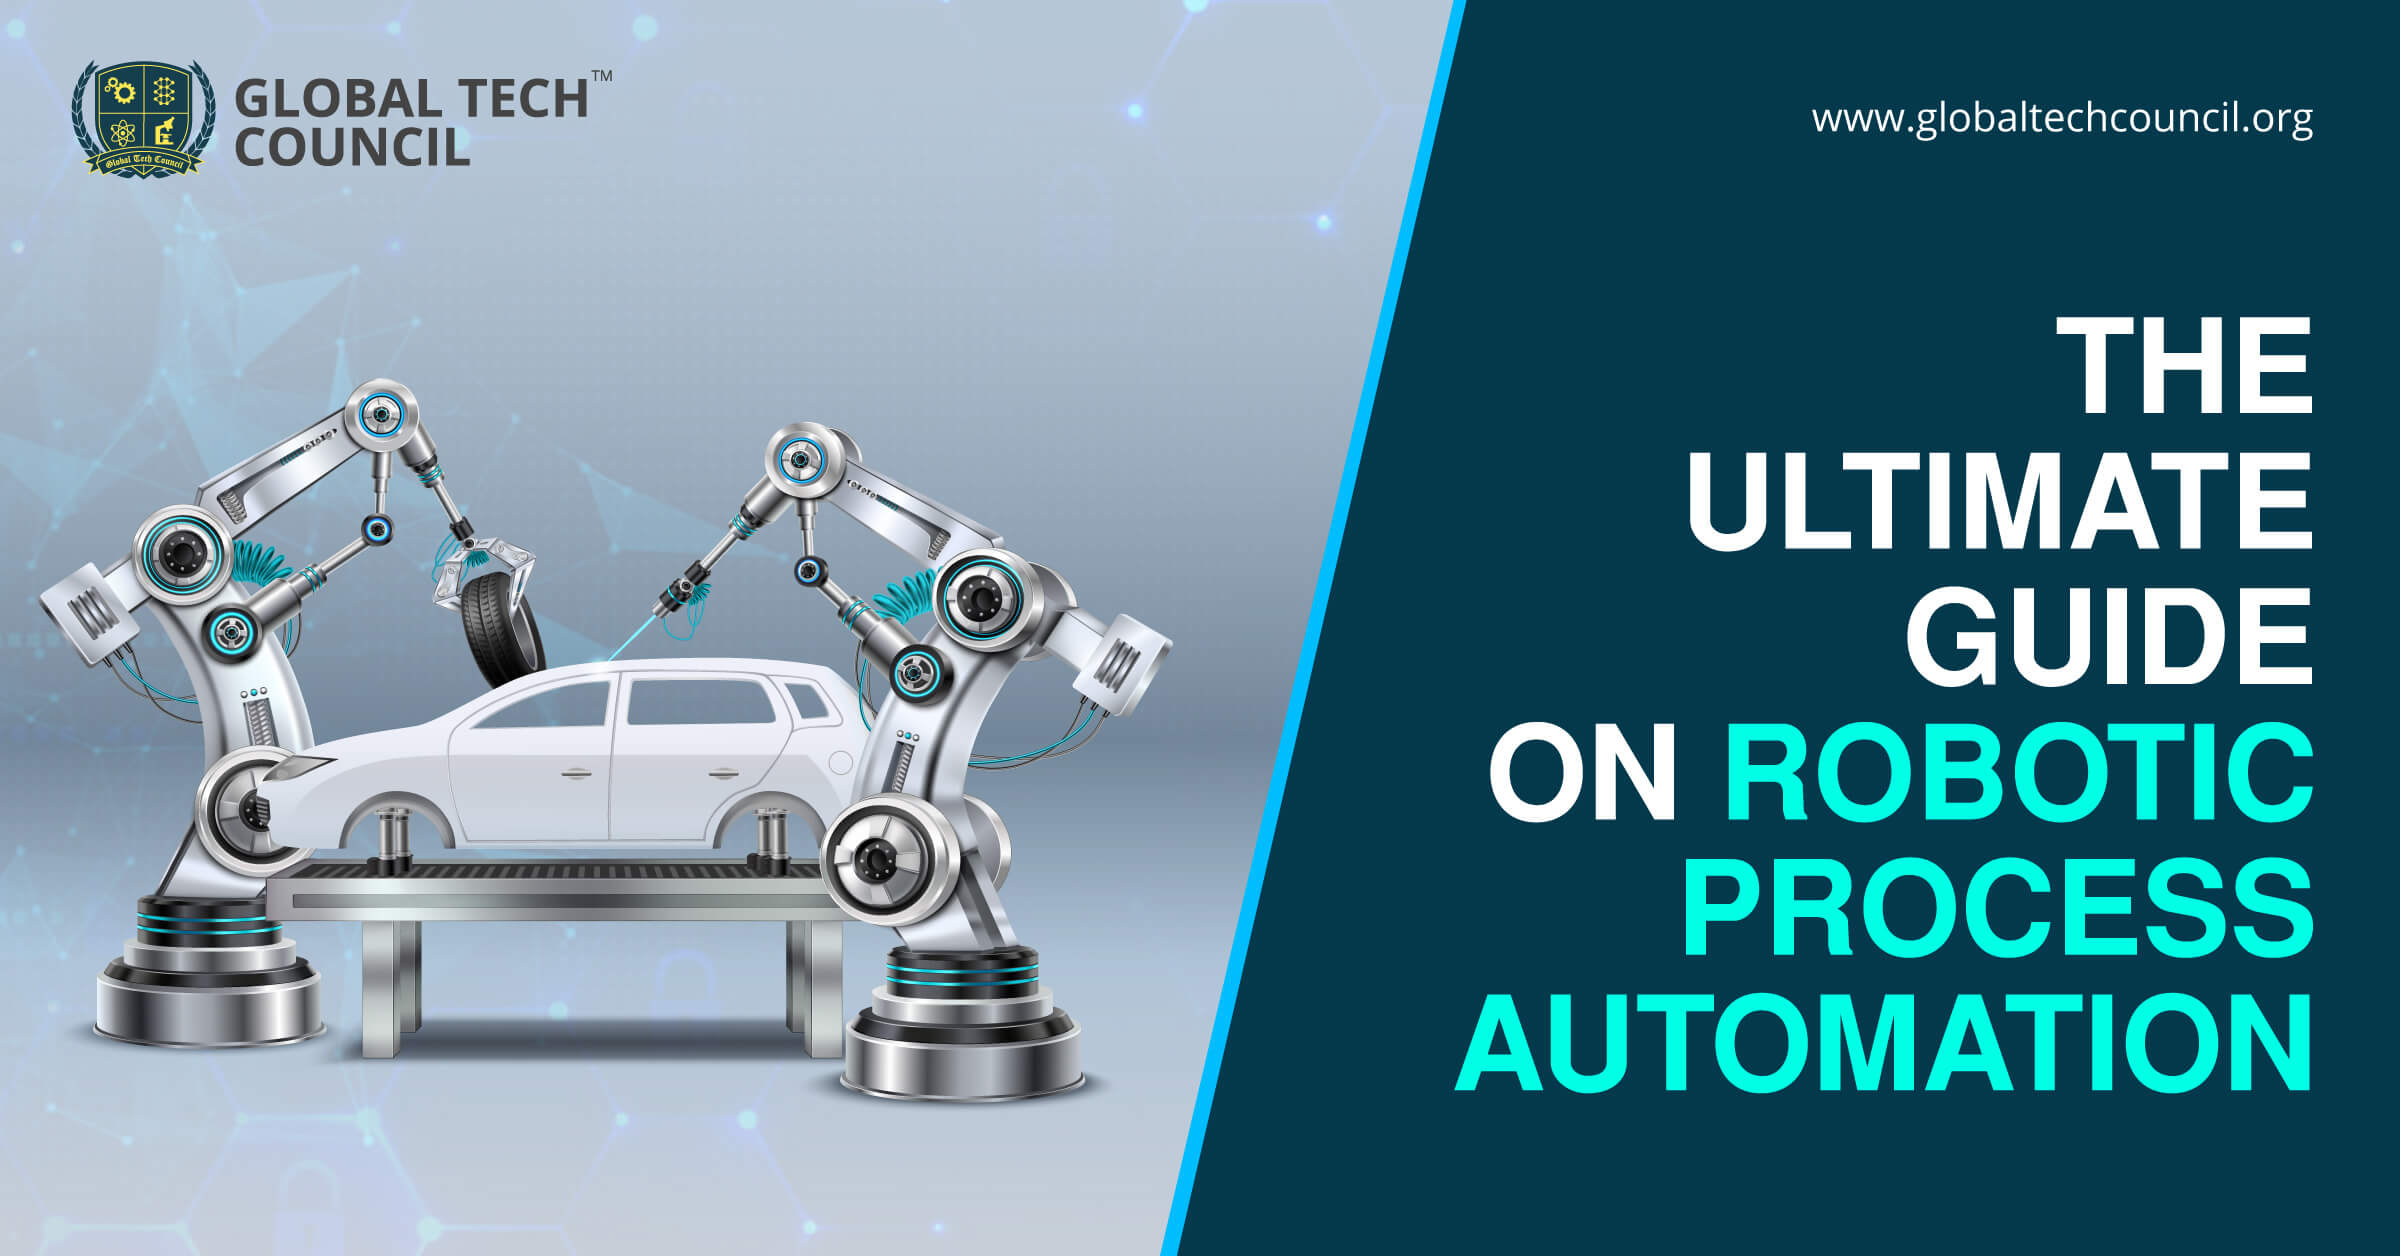 The-ultimate-guide-on-robotic-process-automation